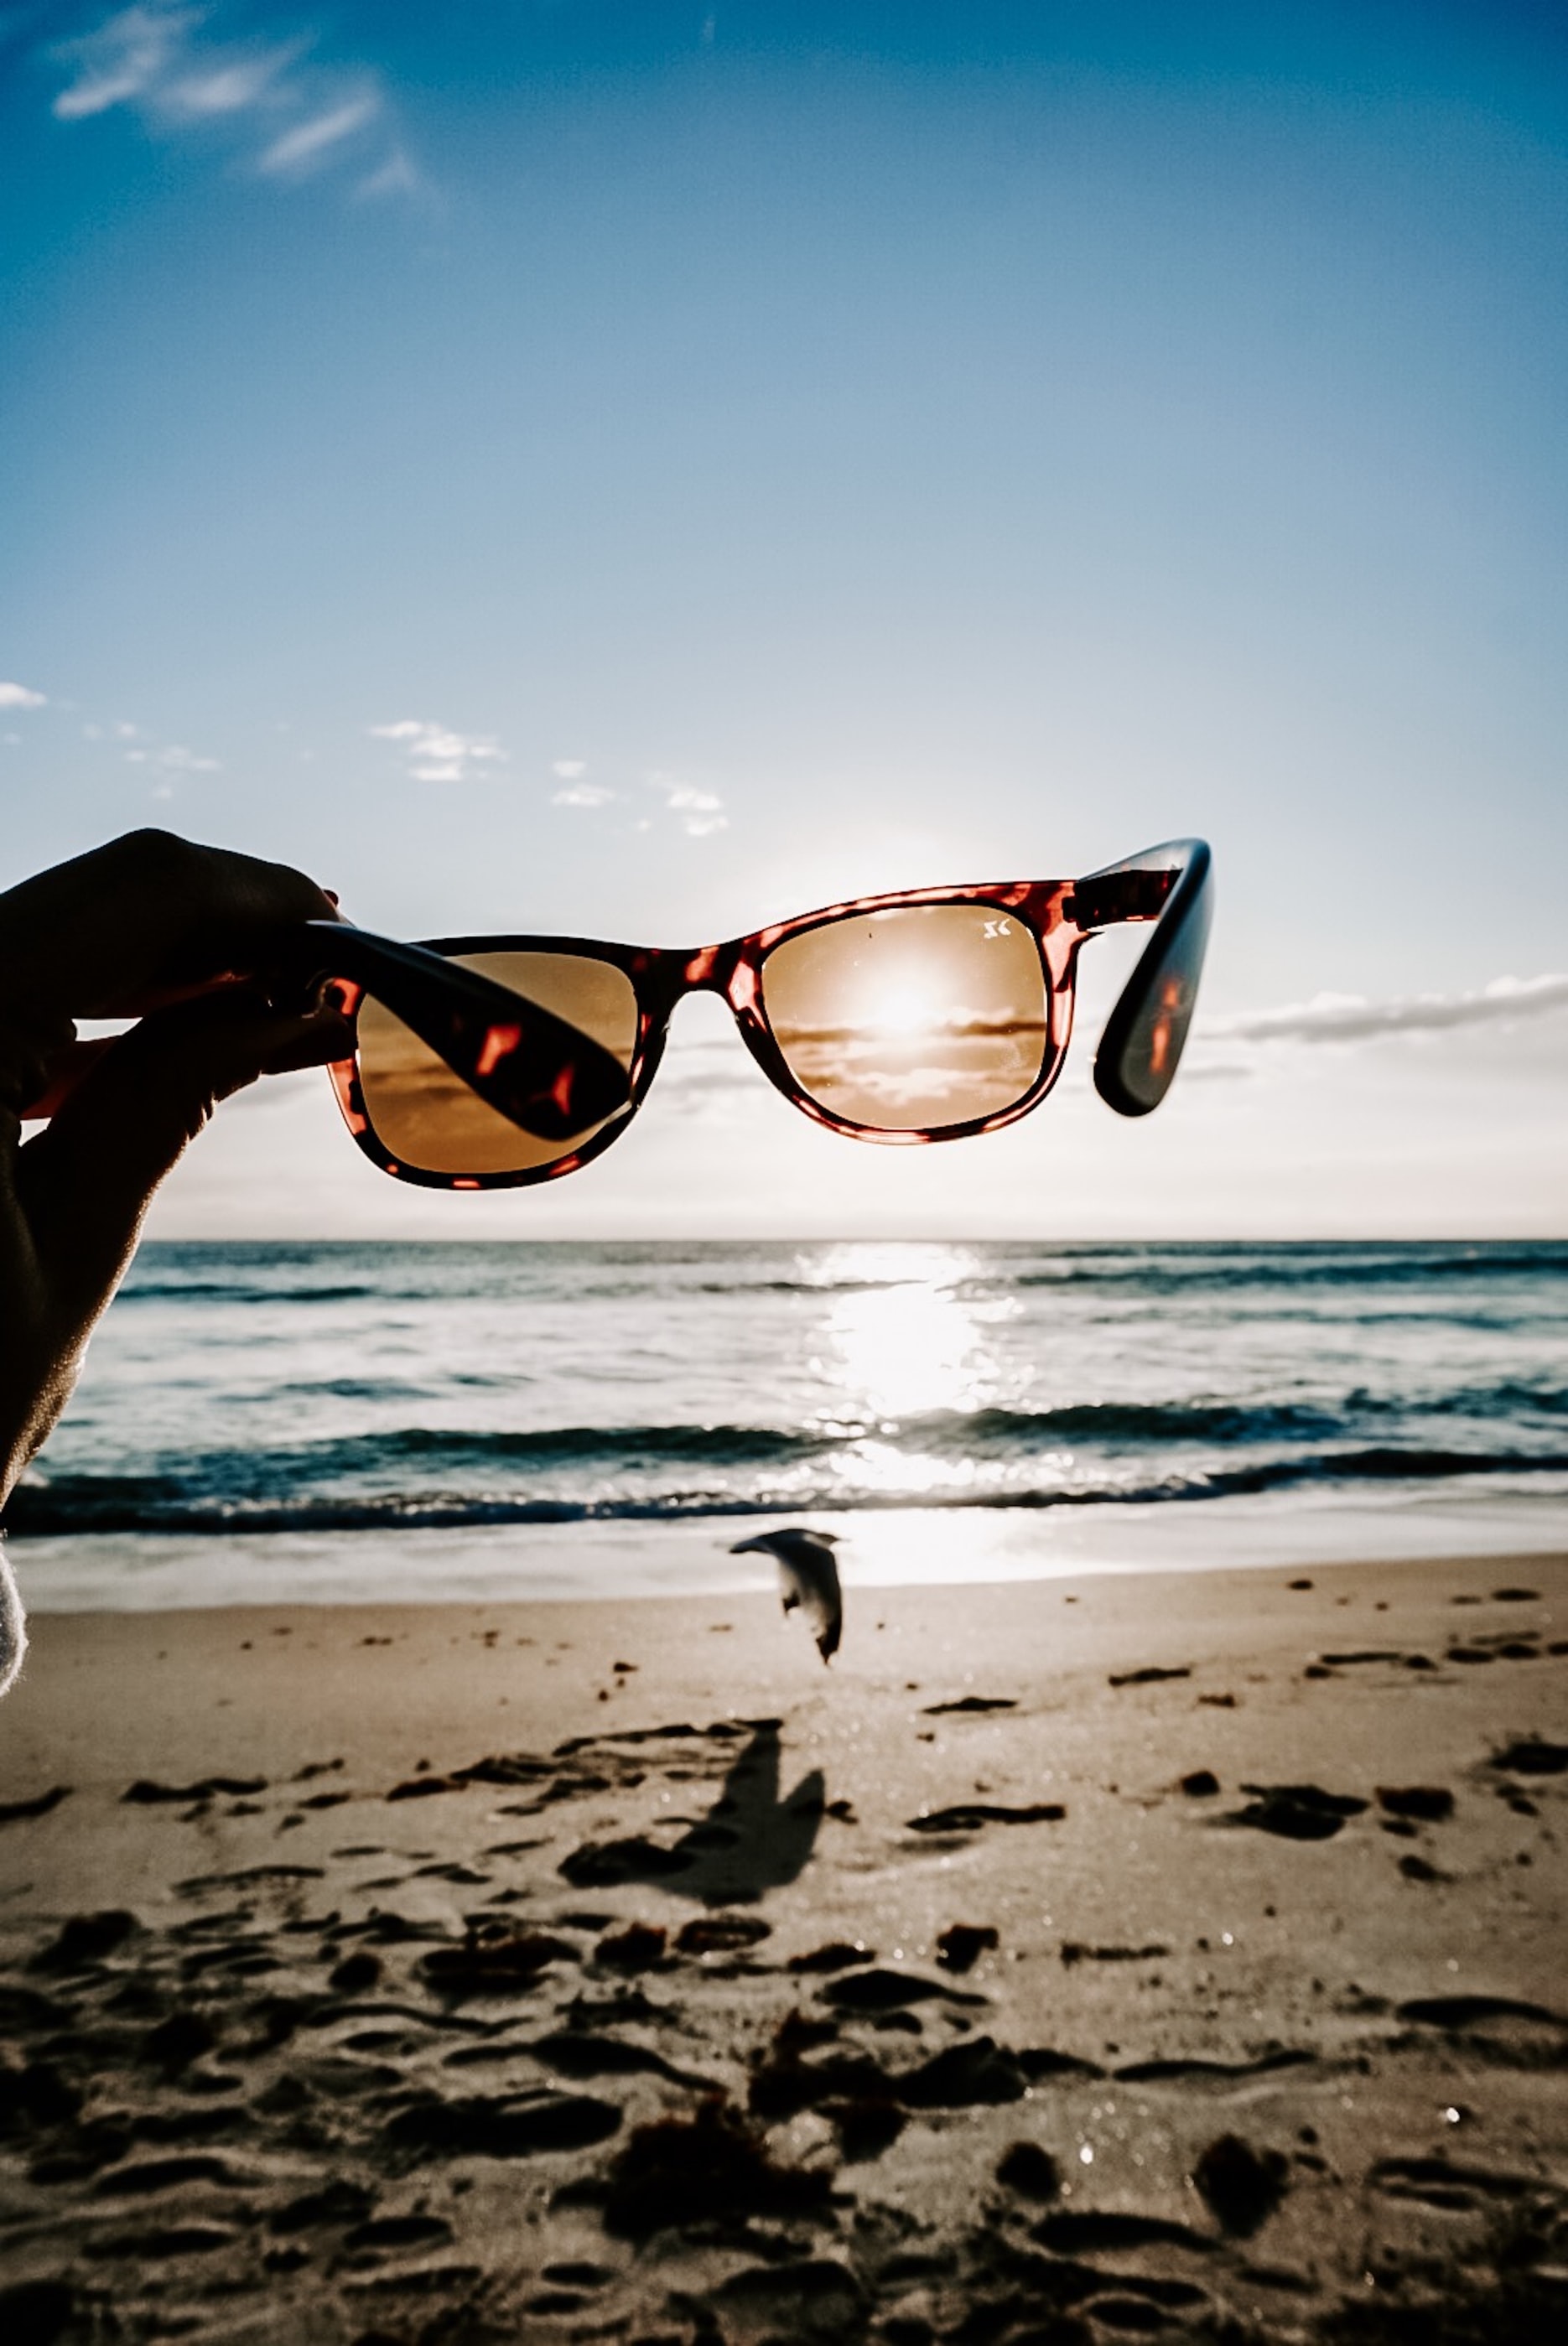 How to select best sunglasses for uv protection in India